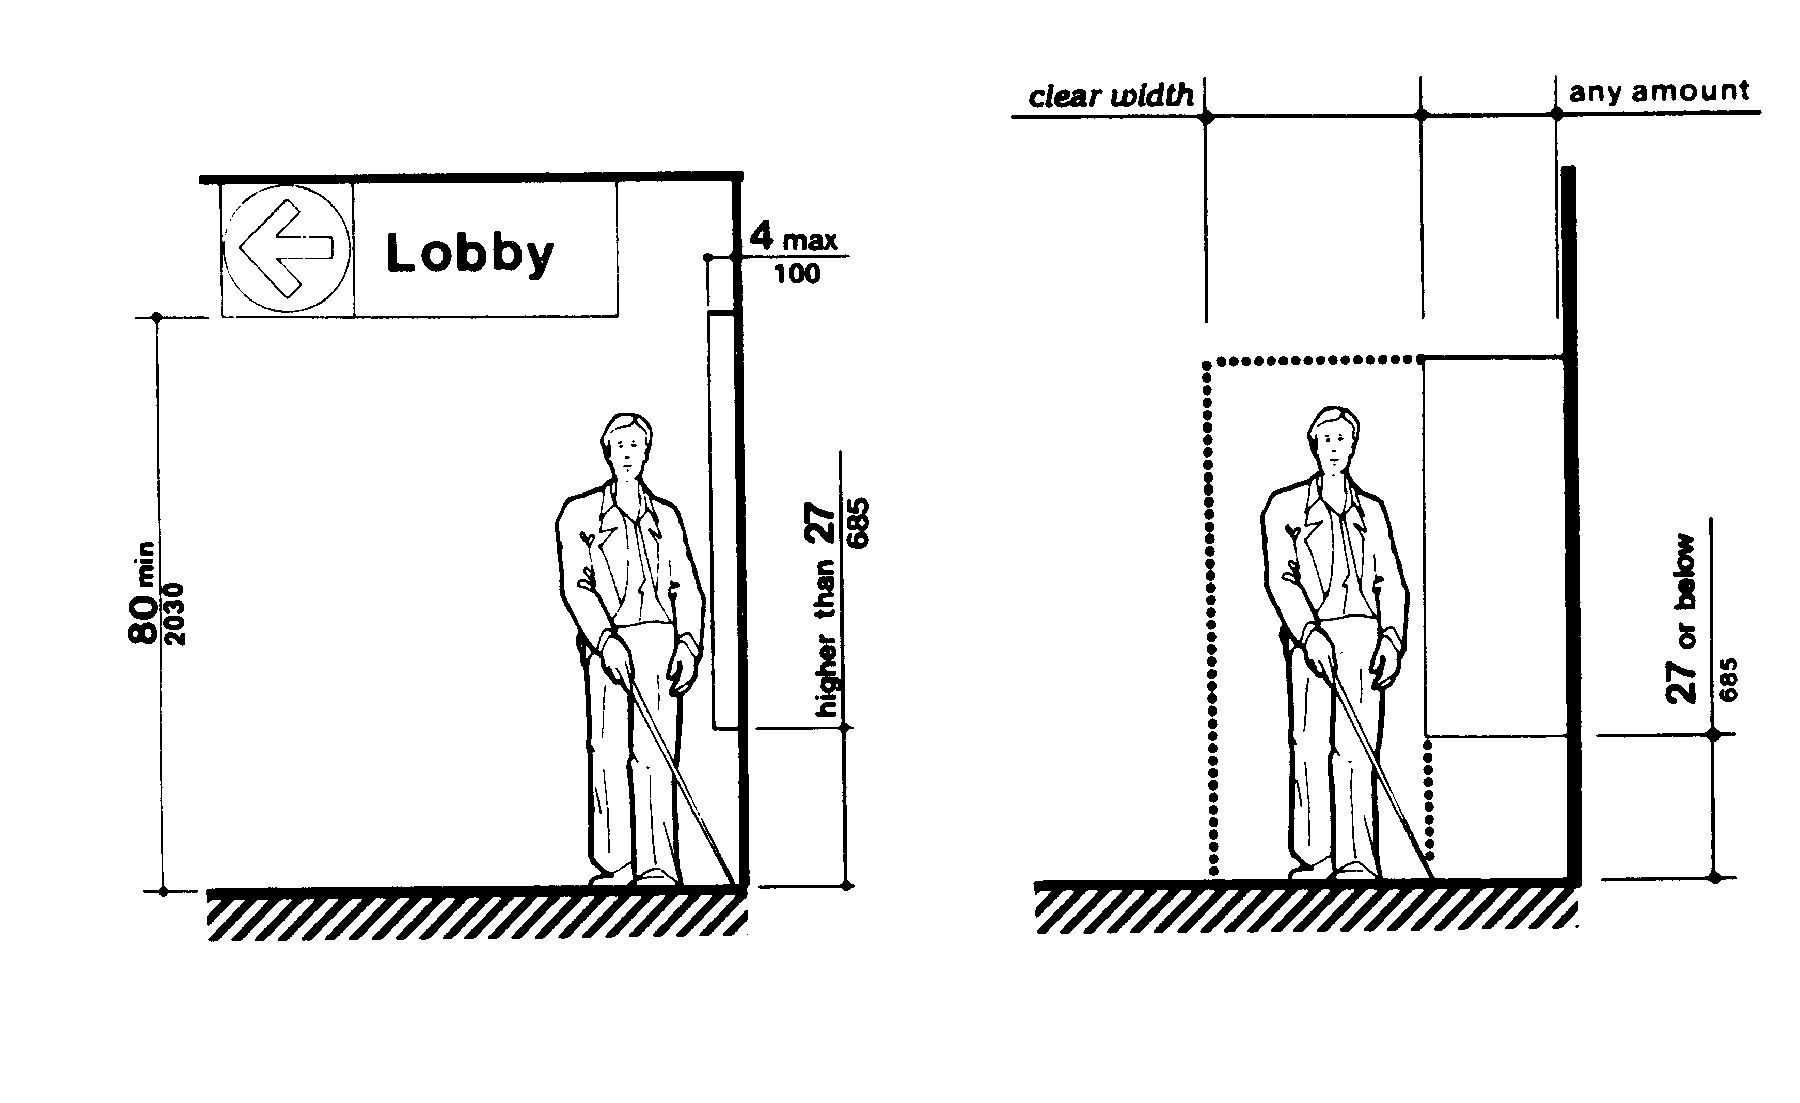 Two line drawings. On the left a drawing with a front view of a blind person using a cane. An overhead sign "Lobby" is mounted so the bottom edge is 80" min. above the floor. Wall-mounted objects above 27" cannot protrude more than 4".
On the right, the drawing shows the same blind person and a wall-mounted object with the bottom edge at 27" or lower. The object can protrude any amount if the bottom edge is 27" or lower.